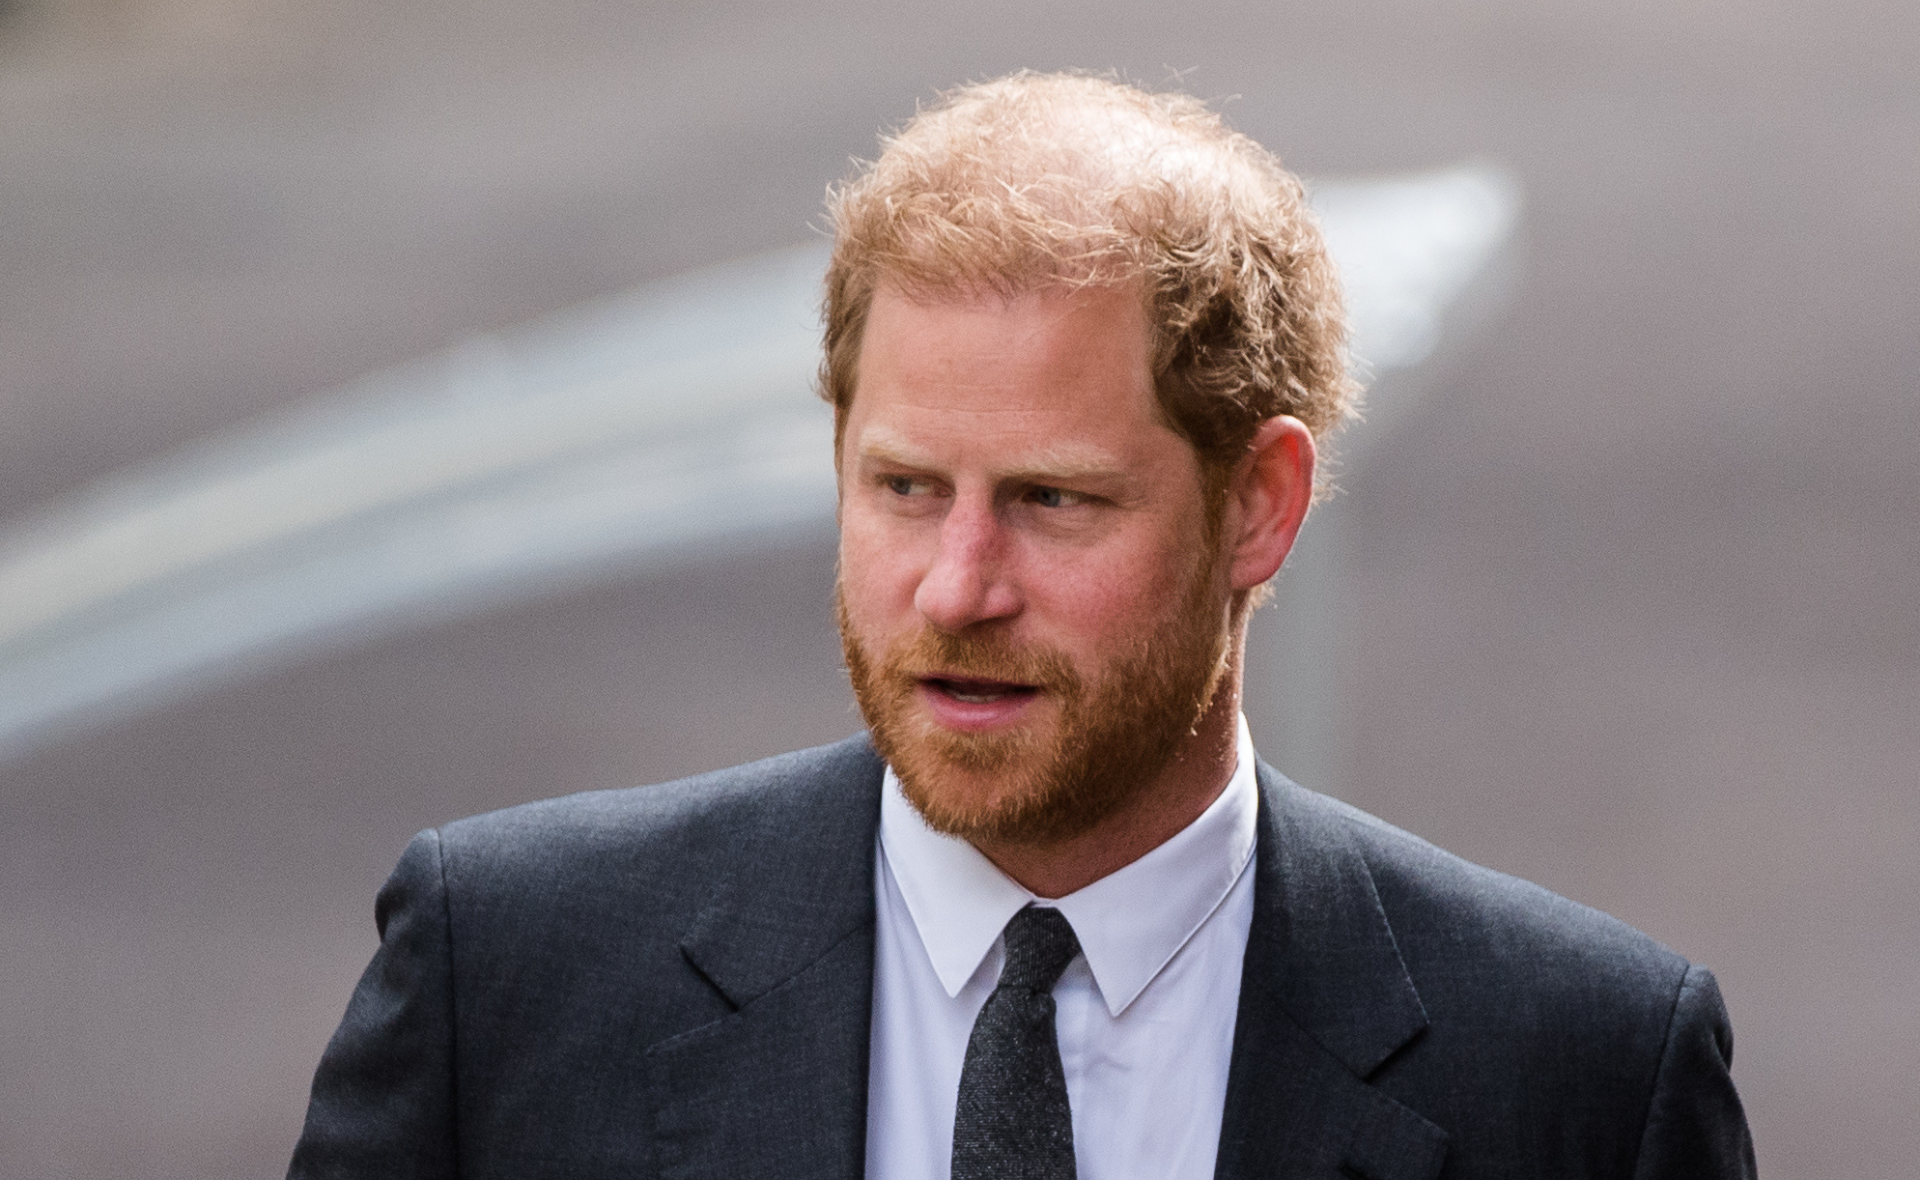 What are the key findings of Prince Harry’s witness statement?